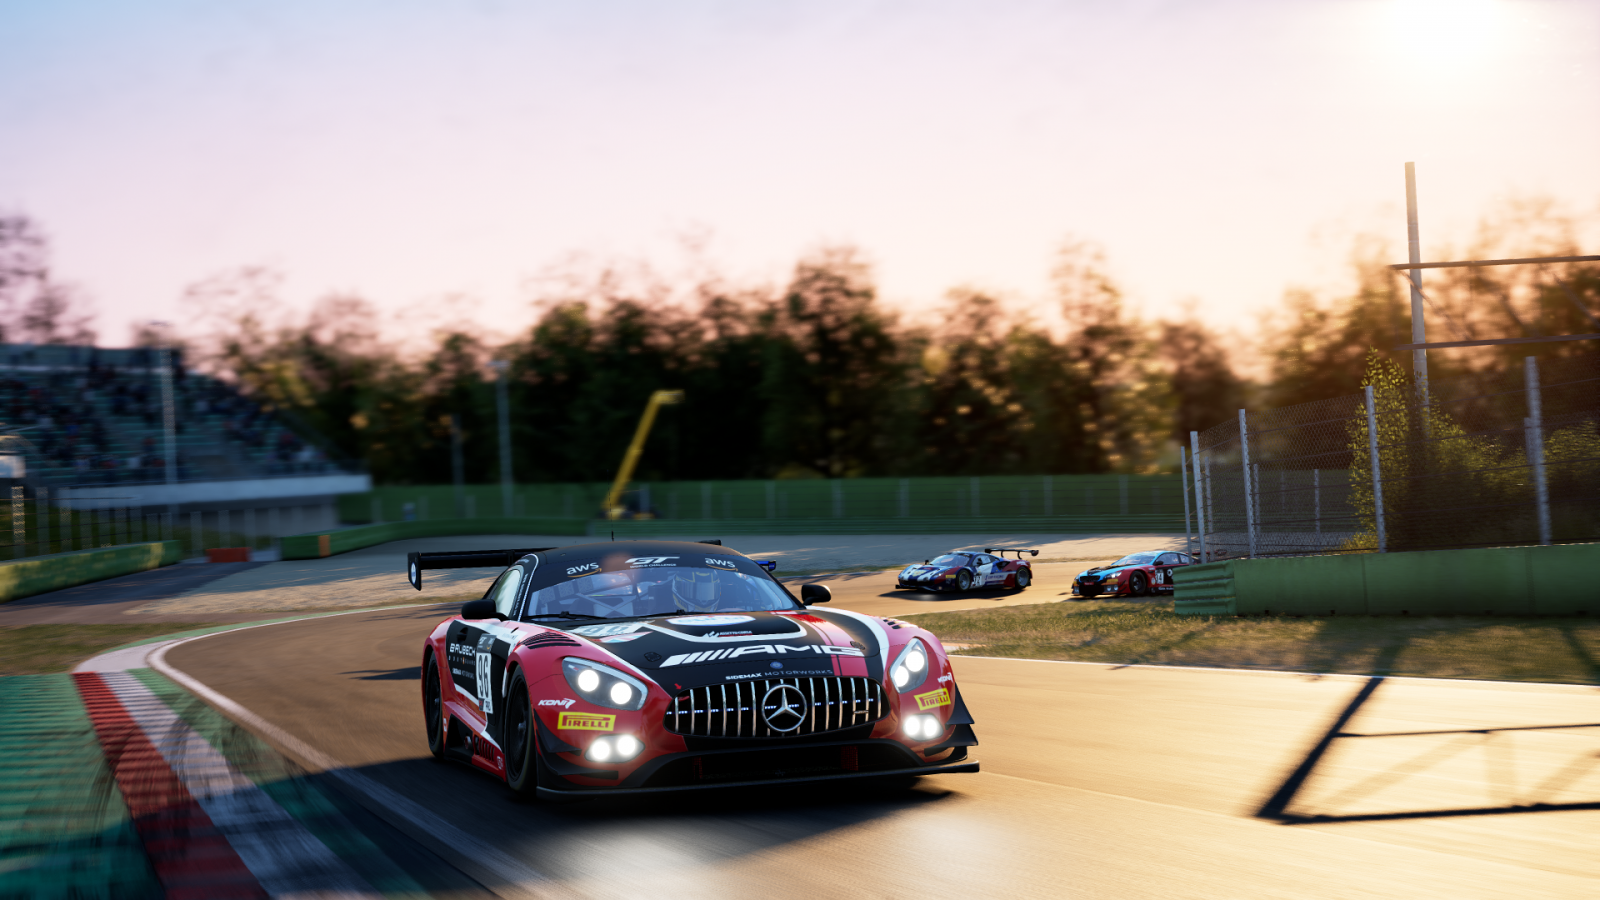 Esports Title to be Decided at Imola Circuit This Sunday